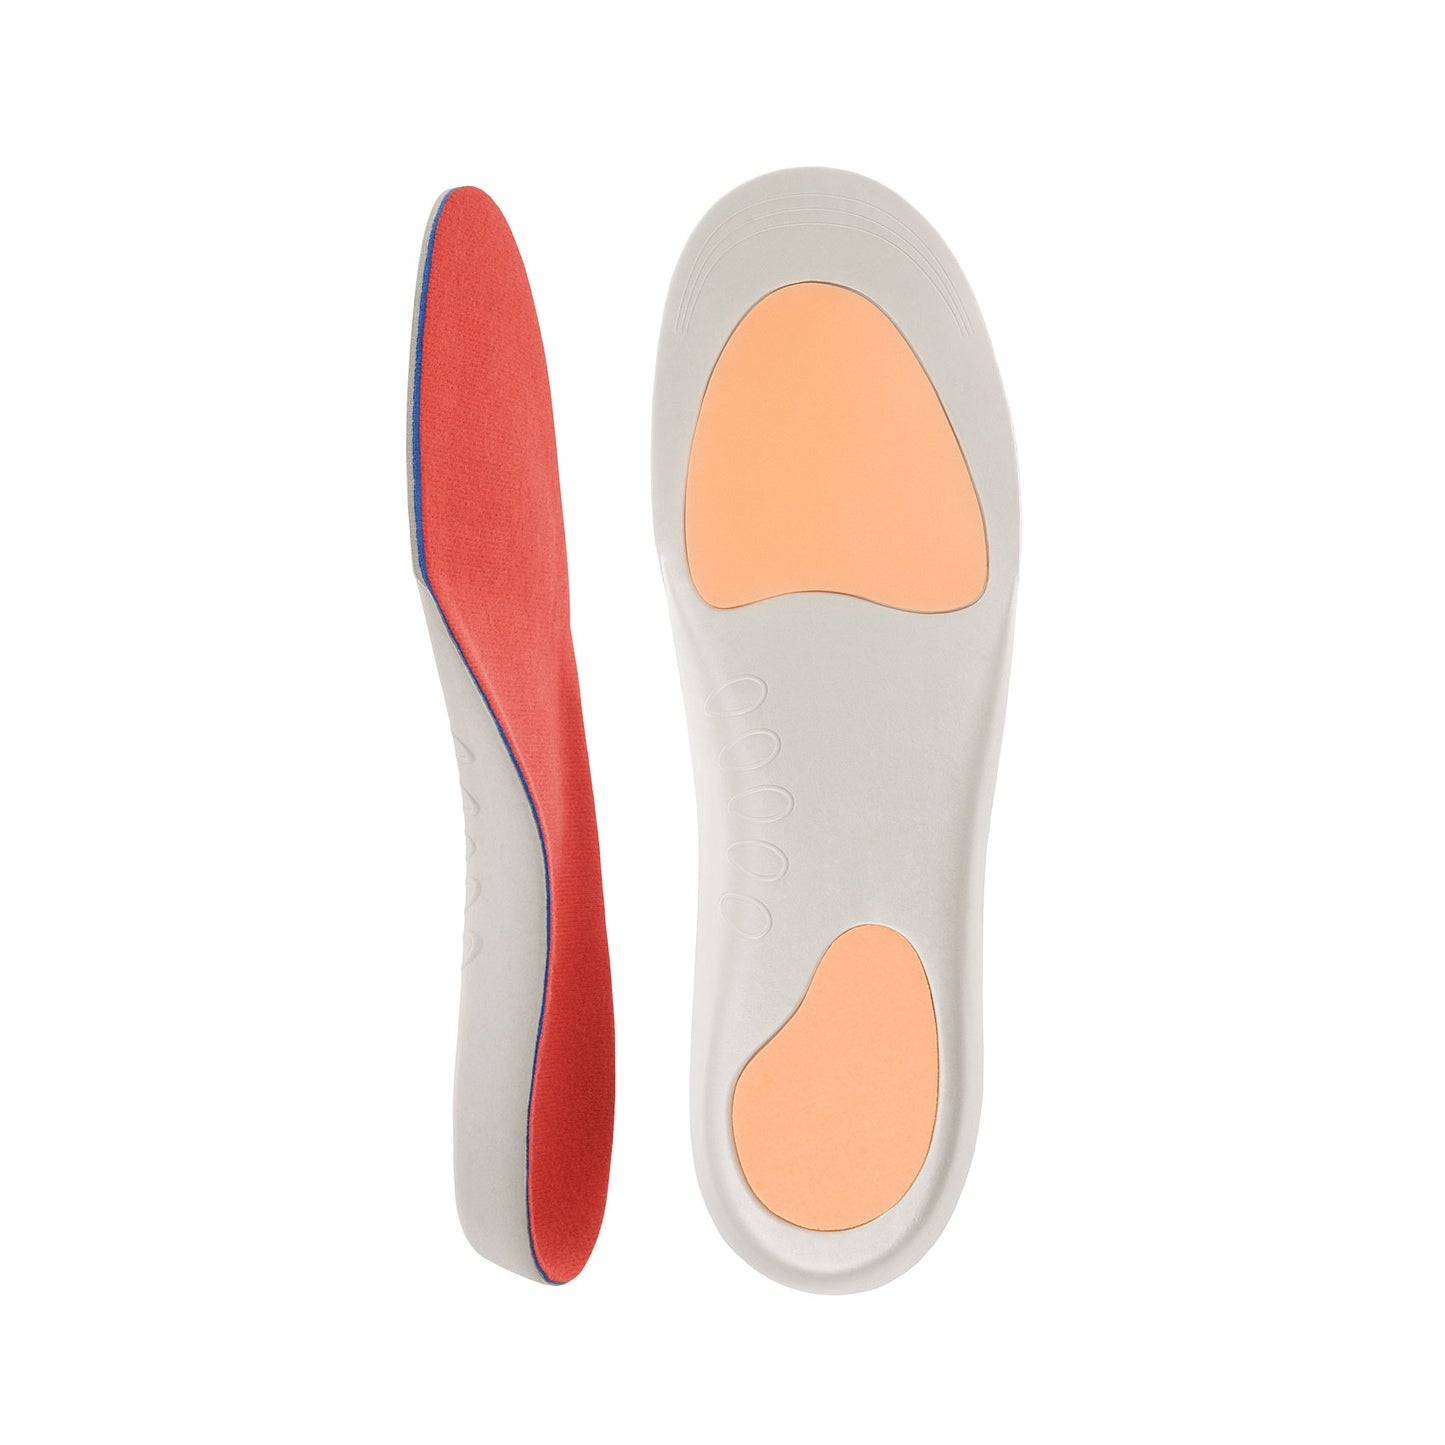 DJMed Orthotic - Shoe Insoles - Mens 9.5-11